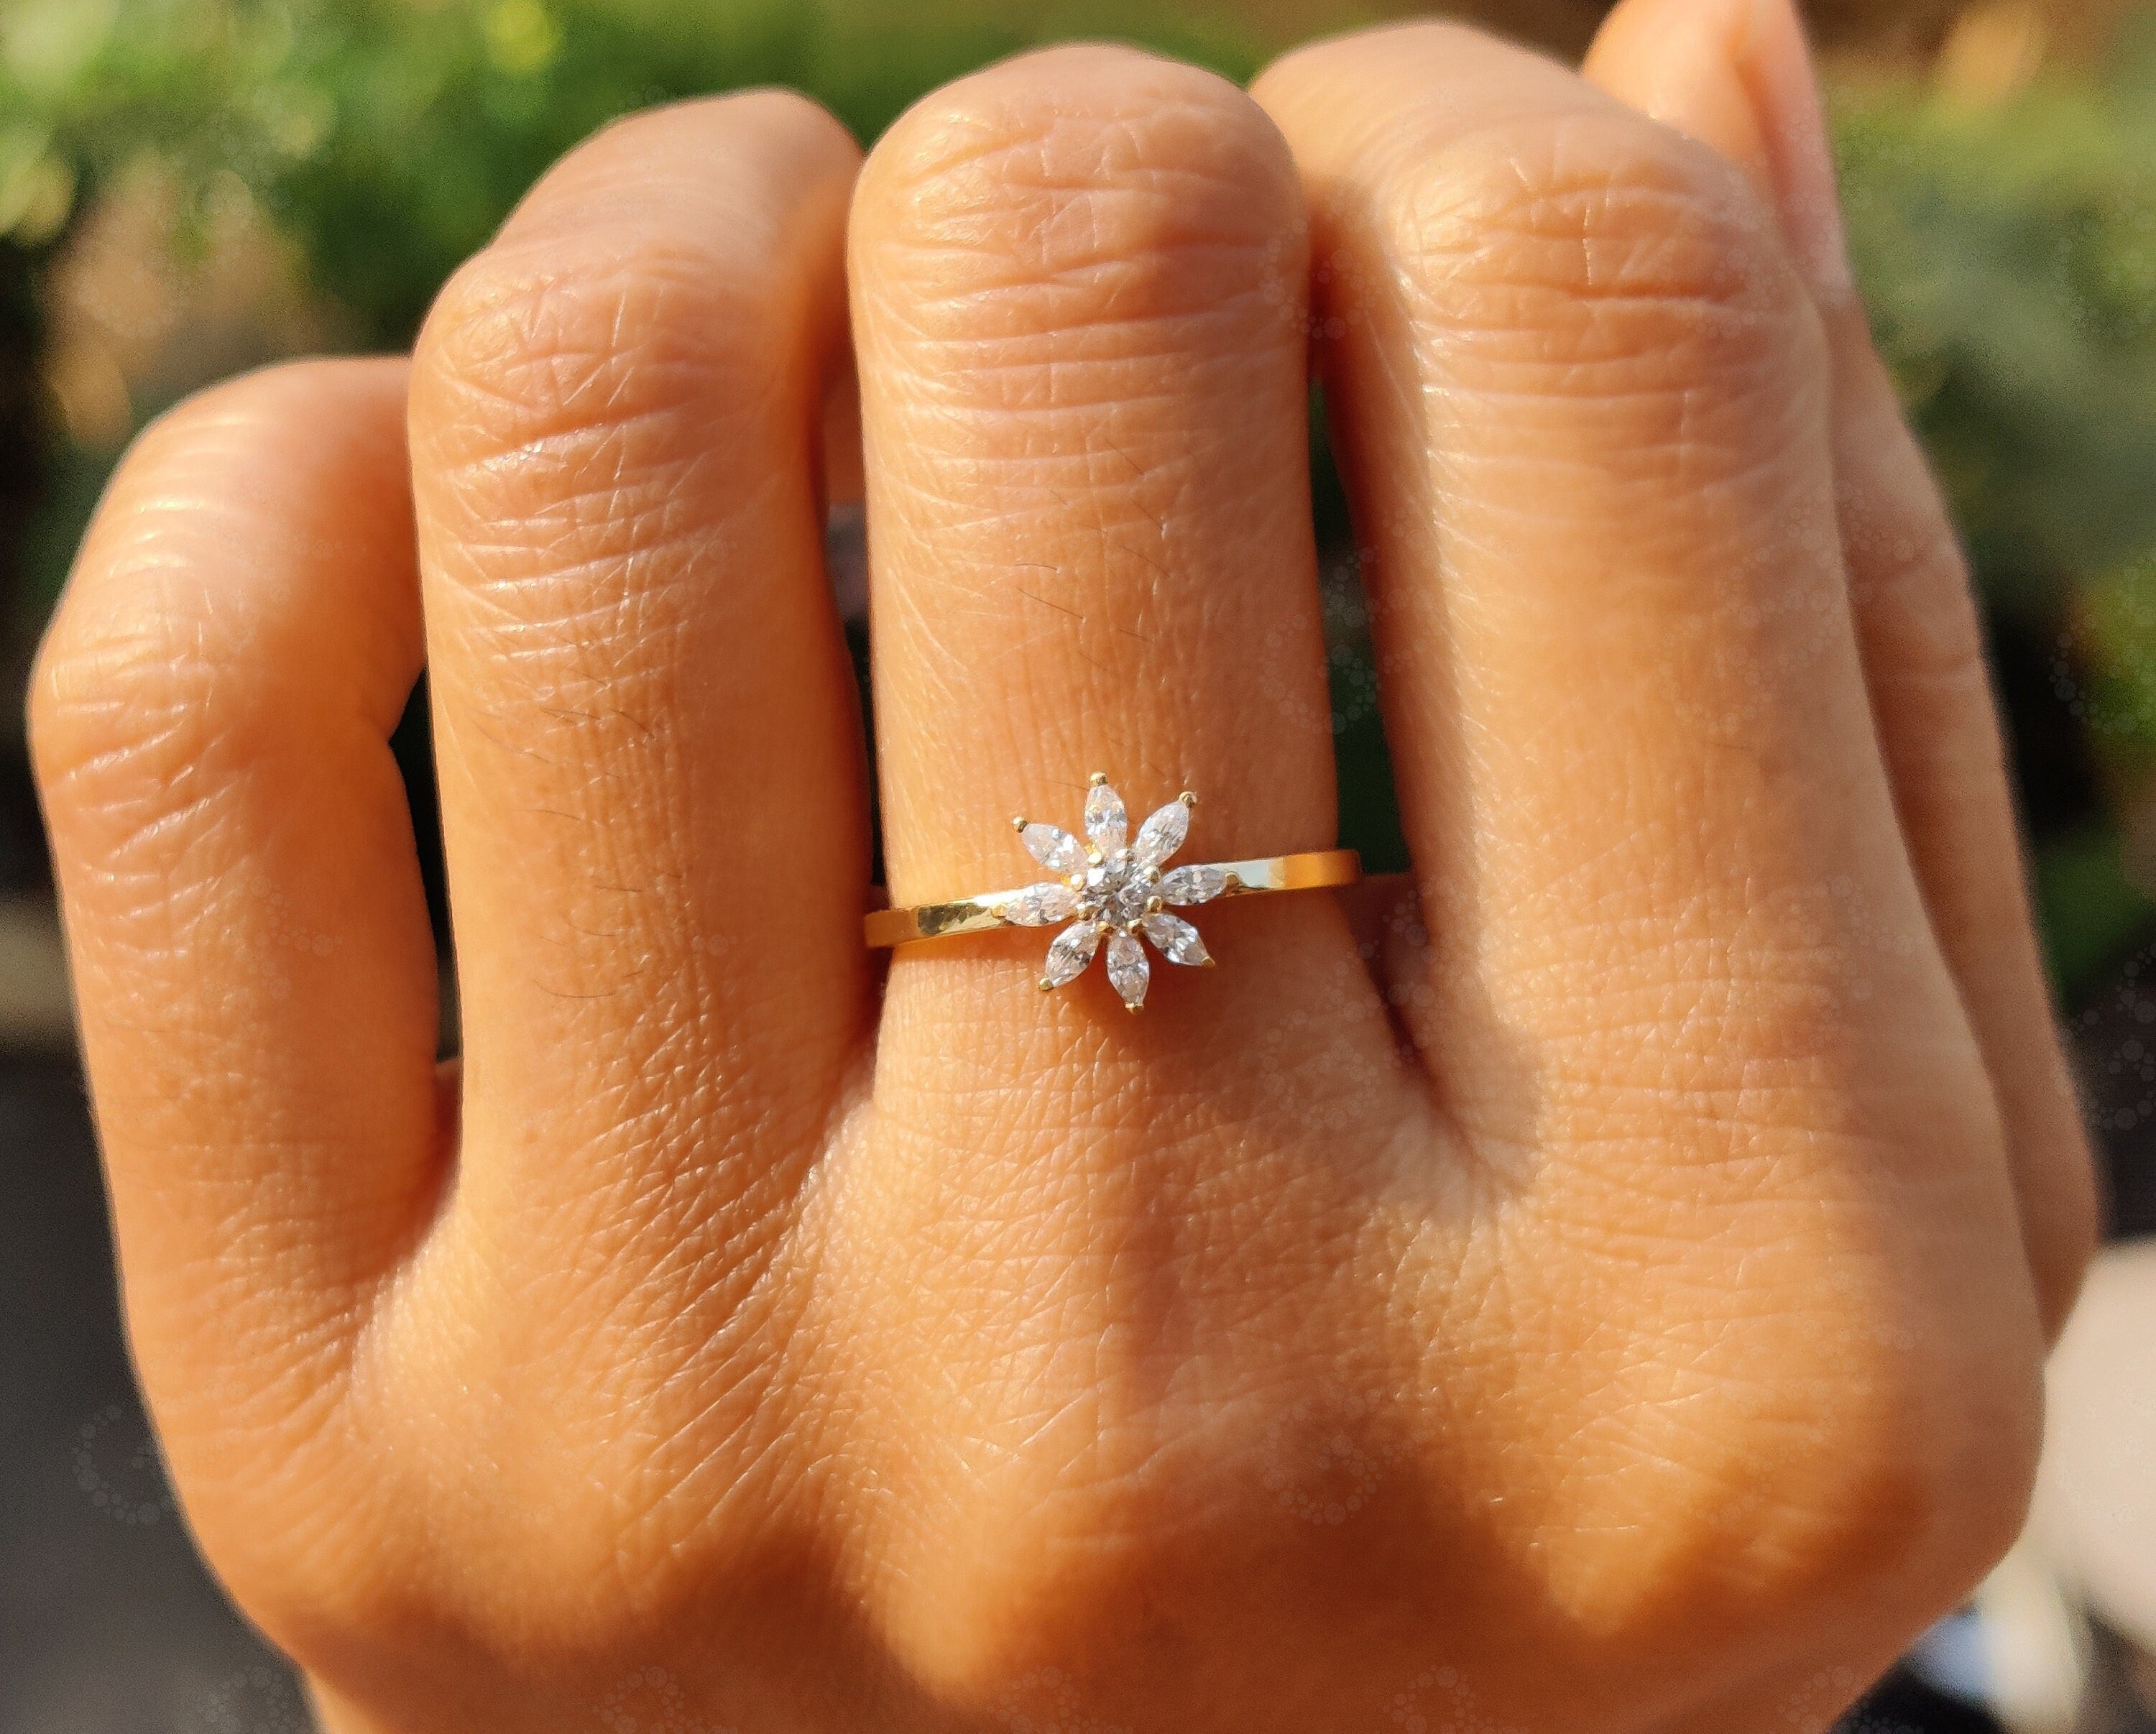 Radiant Sunburst: Silver and Gold Starburst Floral Moissanite Stackable Ring - Nature-Inspired Women's Wedding Ring, Simple Dainty Ring